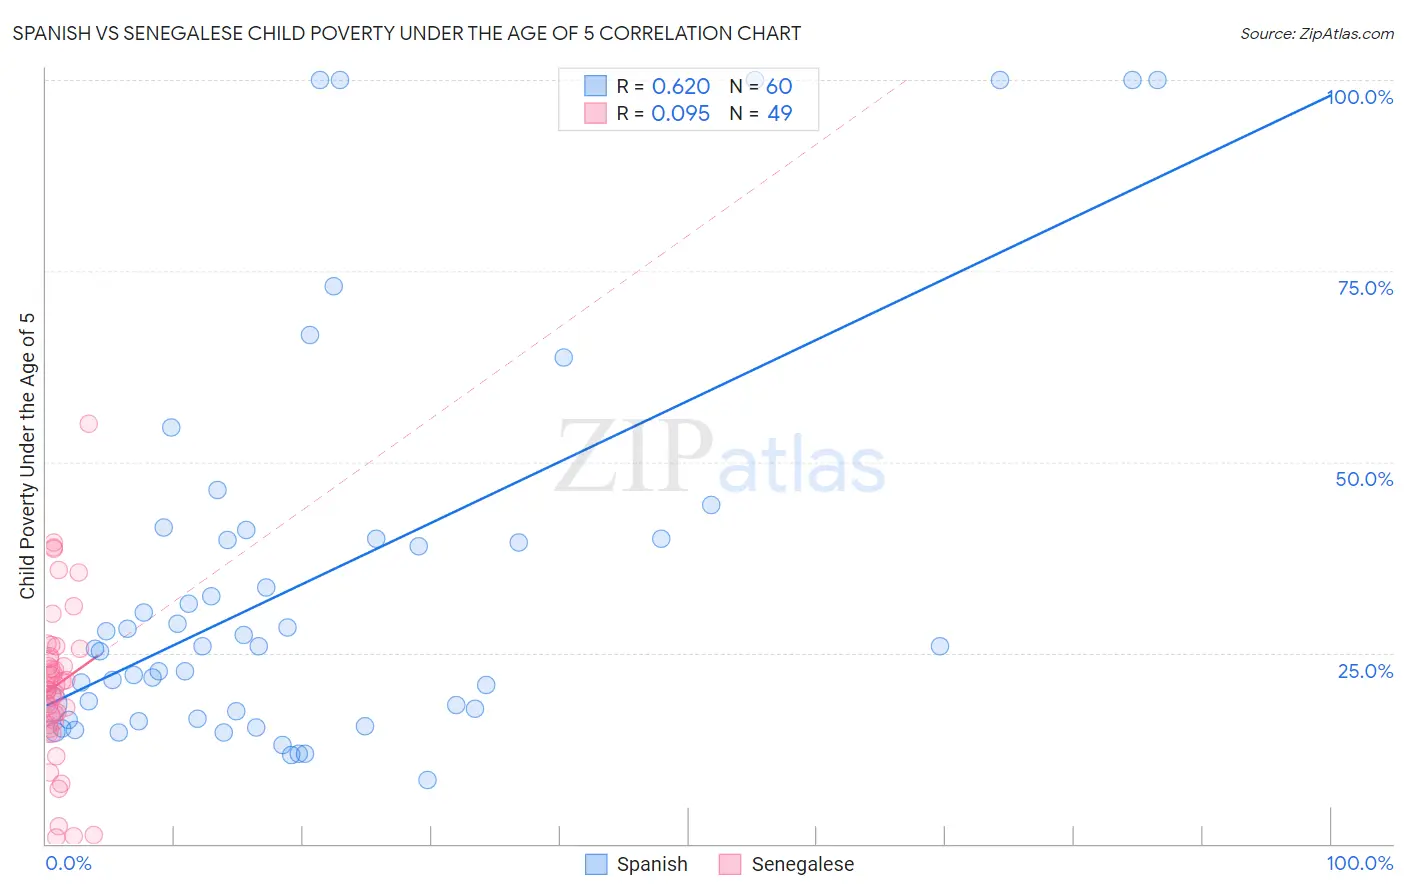 Spanish vs Senegalese Child Poverty Under the Age of 5